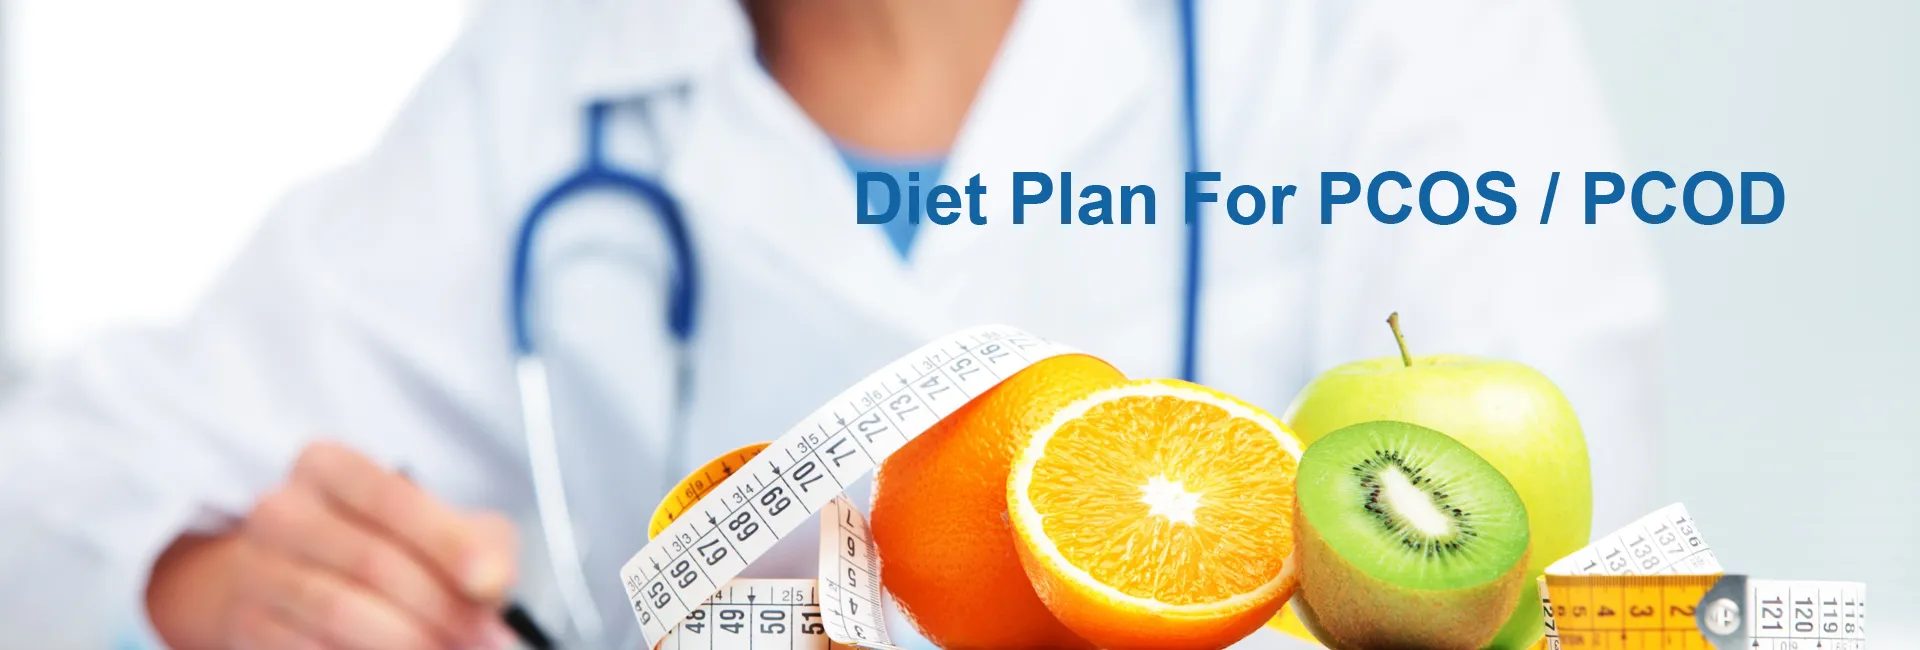 Diet Plan For PCOS / PCOD In Surrey